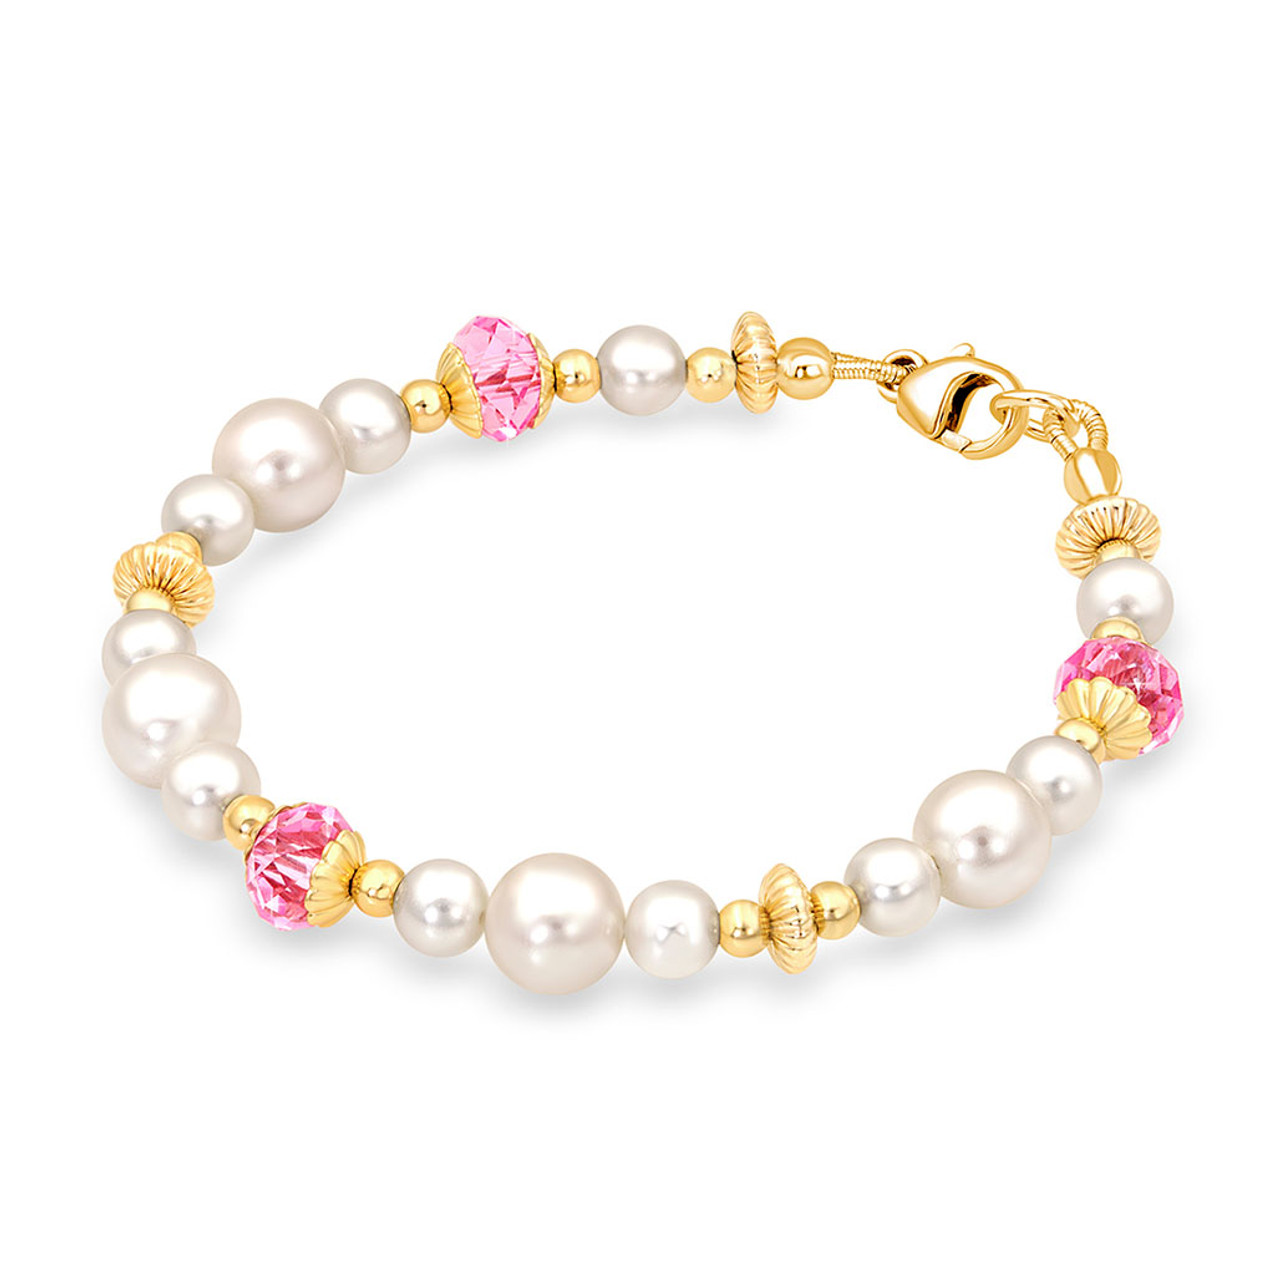 Floating Pearl Bracelet – Made By Mary